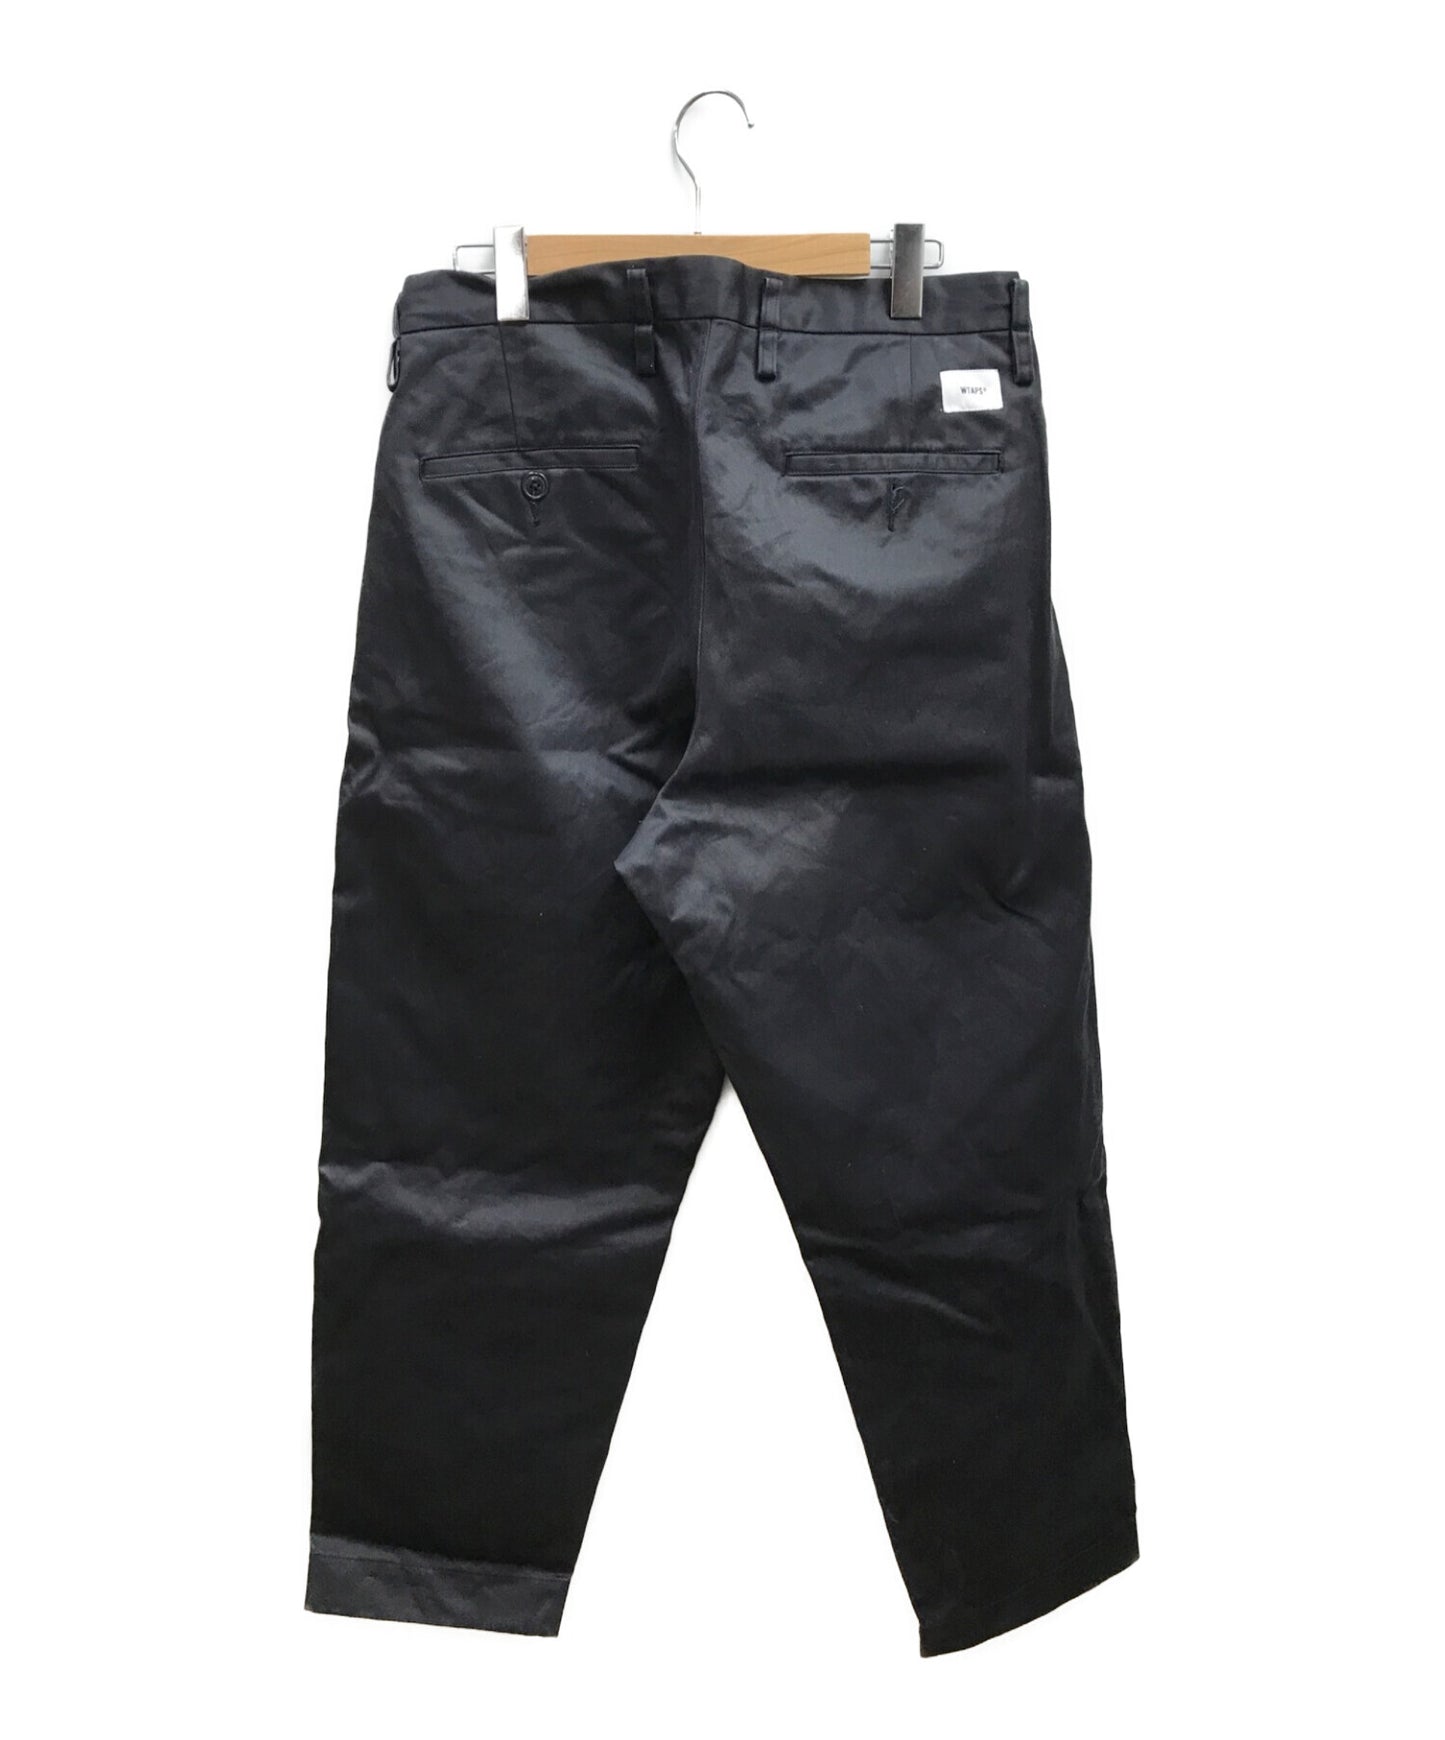 WTAPS TUCK 02/TROUSERS/COTTON.TWILL/Cotton Tuck Twill Pants